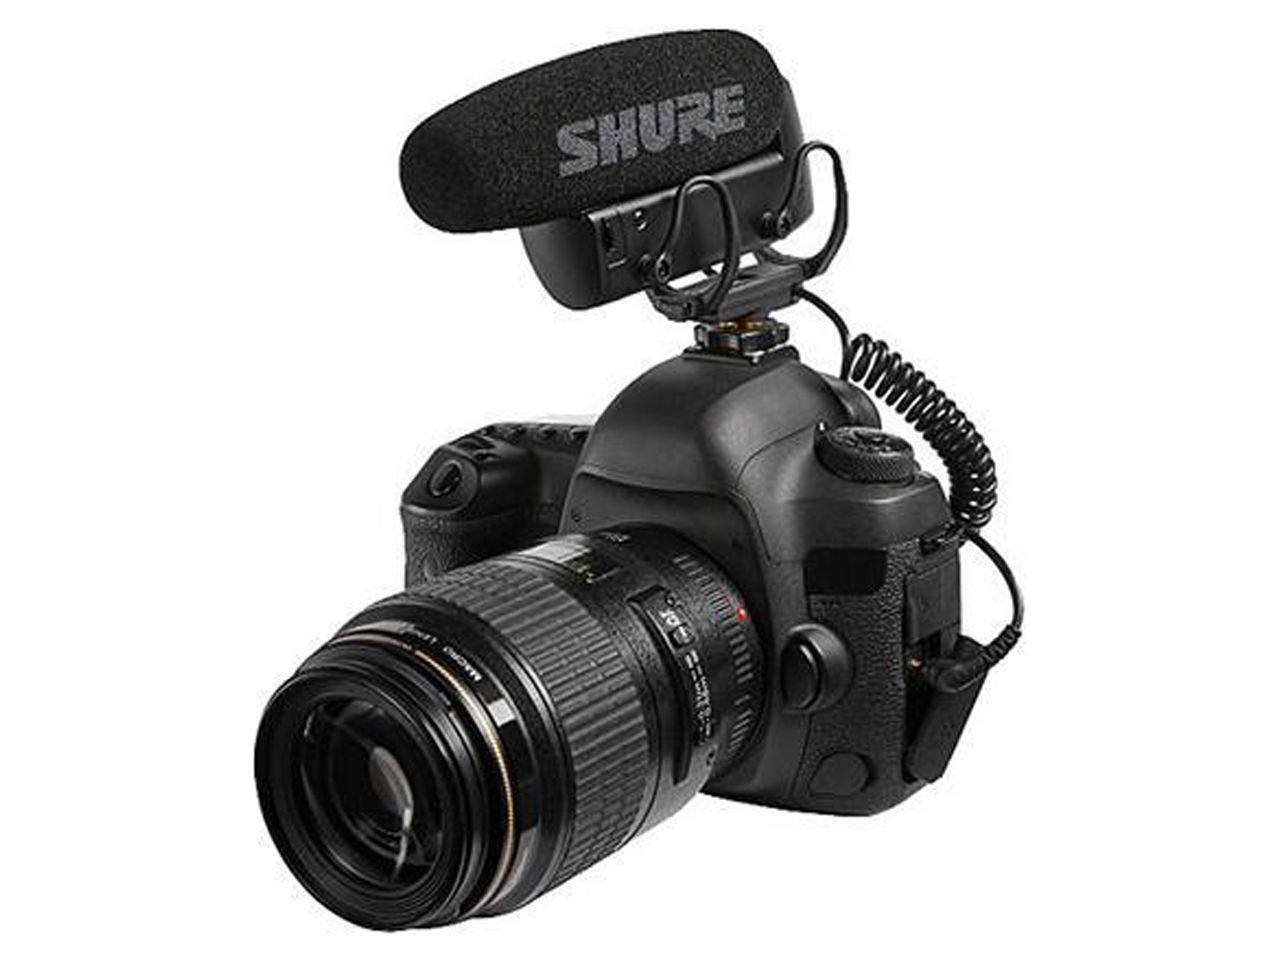 Shure VP83 LensHopper Camera-Mounted Condenser Microphone for Use with DSLR Cameras and HD Camcorders - image 5 of 14